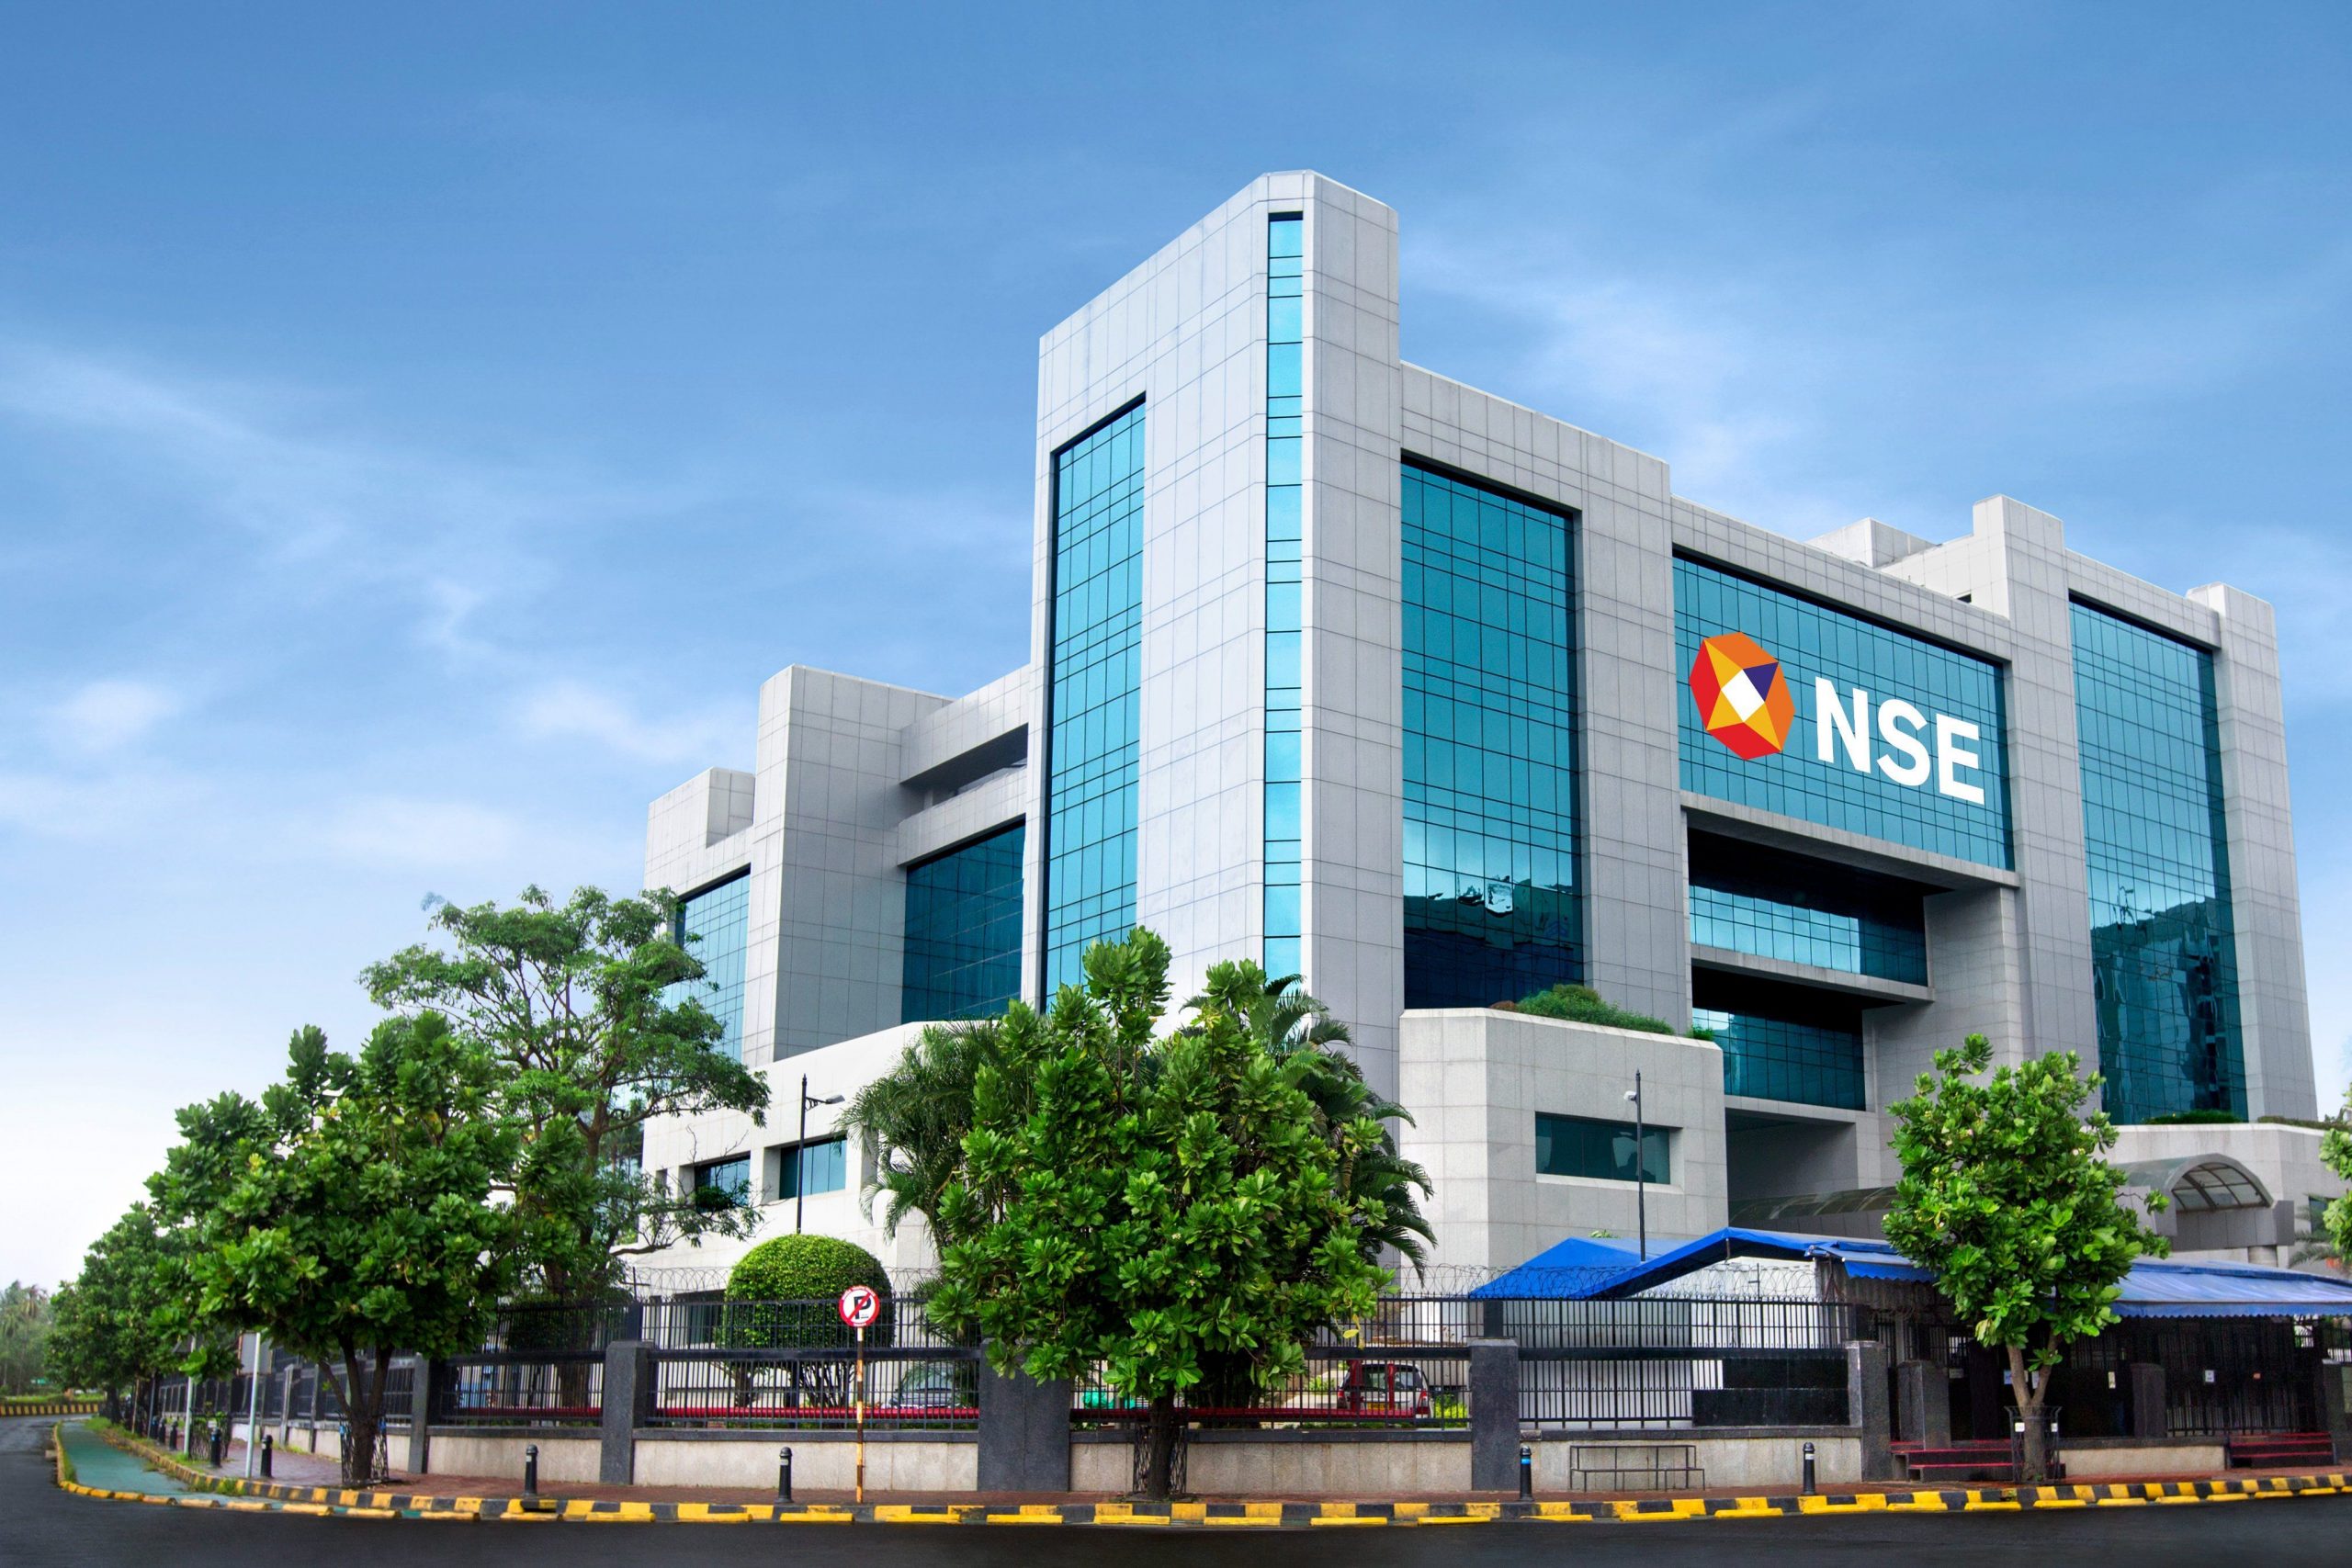 NSE F&O Ban: GNFC, PNB, BHEL and others under ban on Tuesday, May 24, 2022